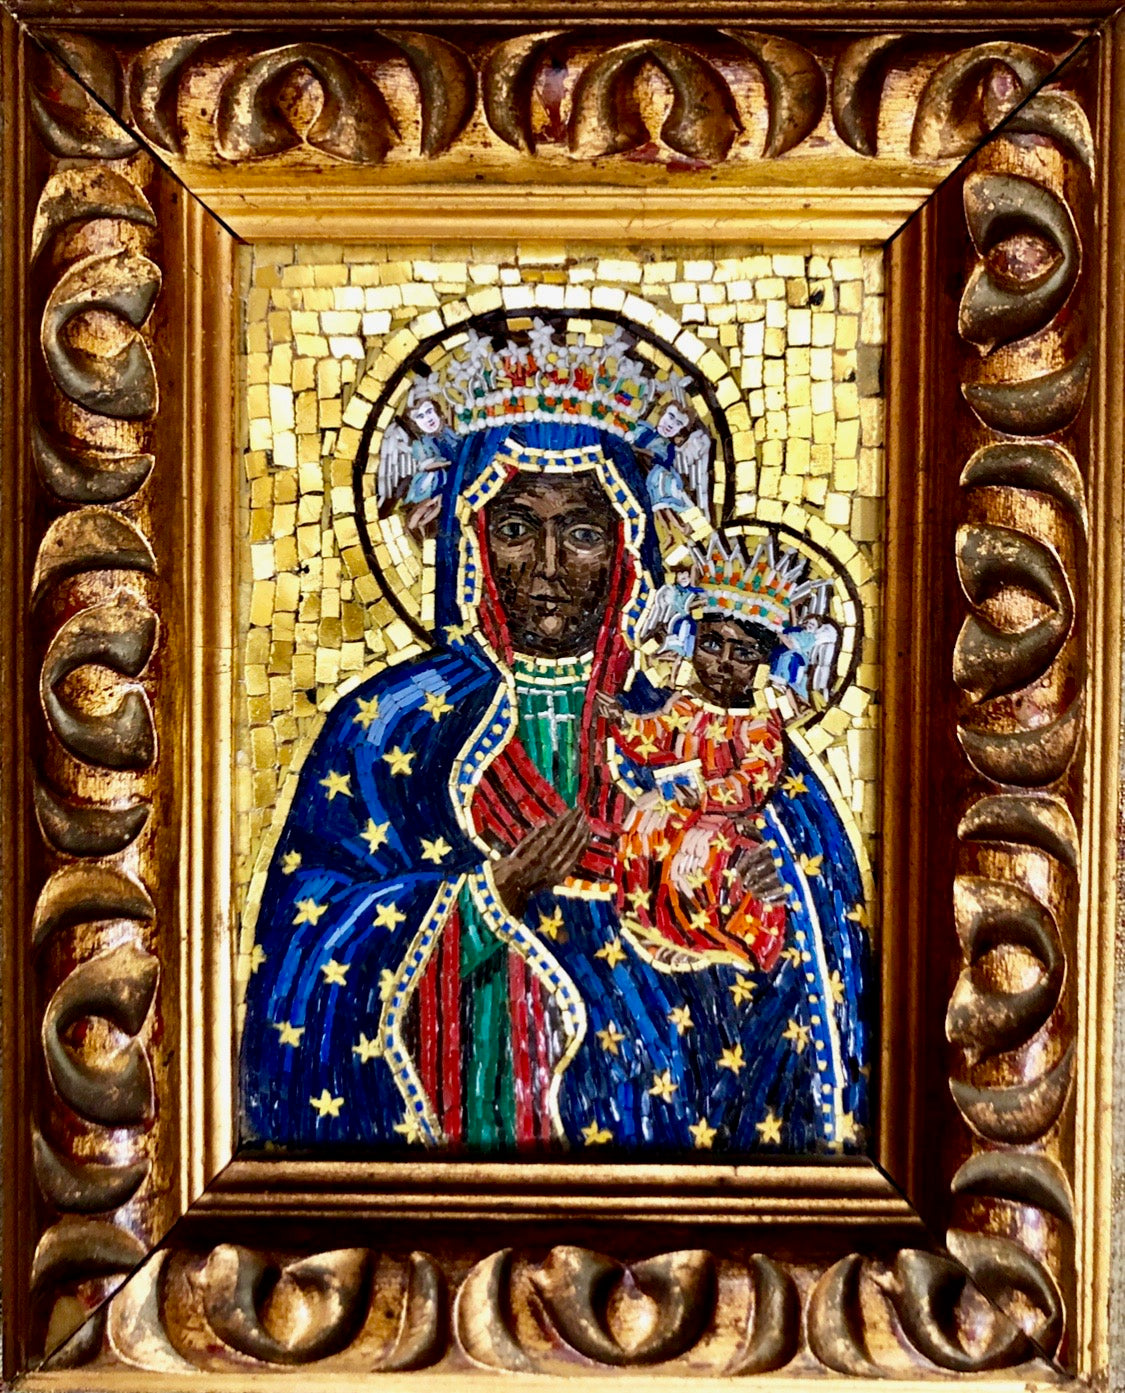 A VERY BEAUTIFUL, UNIQUE AND RARE BLACK MADONNA. Middle 17th Century.